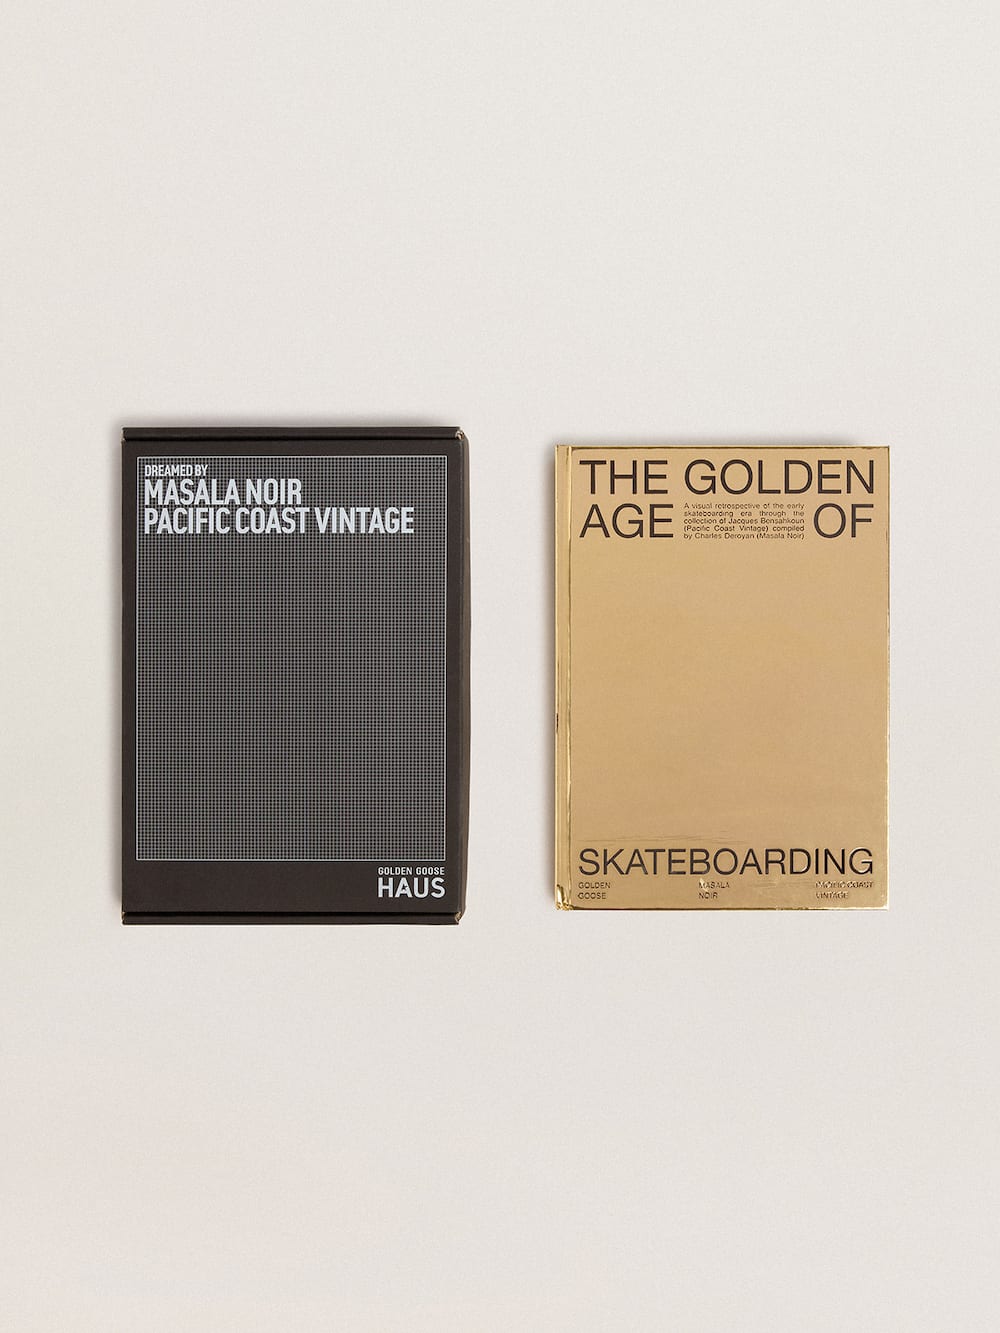 Golden Goose - “The Golden age of Skateboarding” Dreamed by Pacific Coast Vintage and Masala Noir “HAUS of Dreamers”限定版 in 